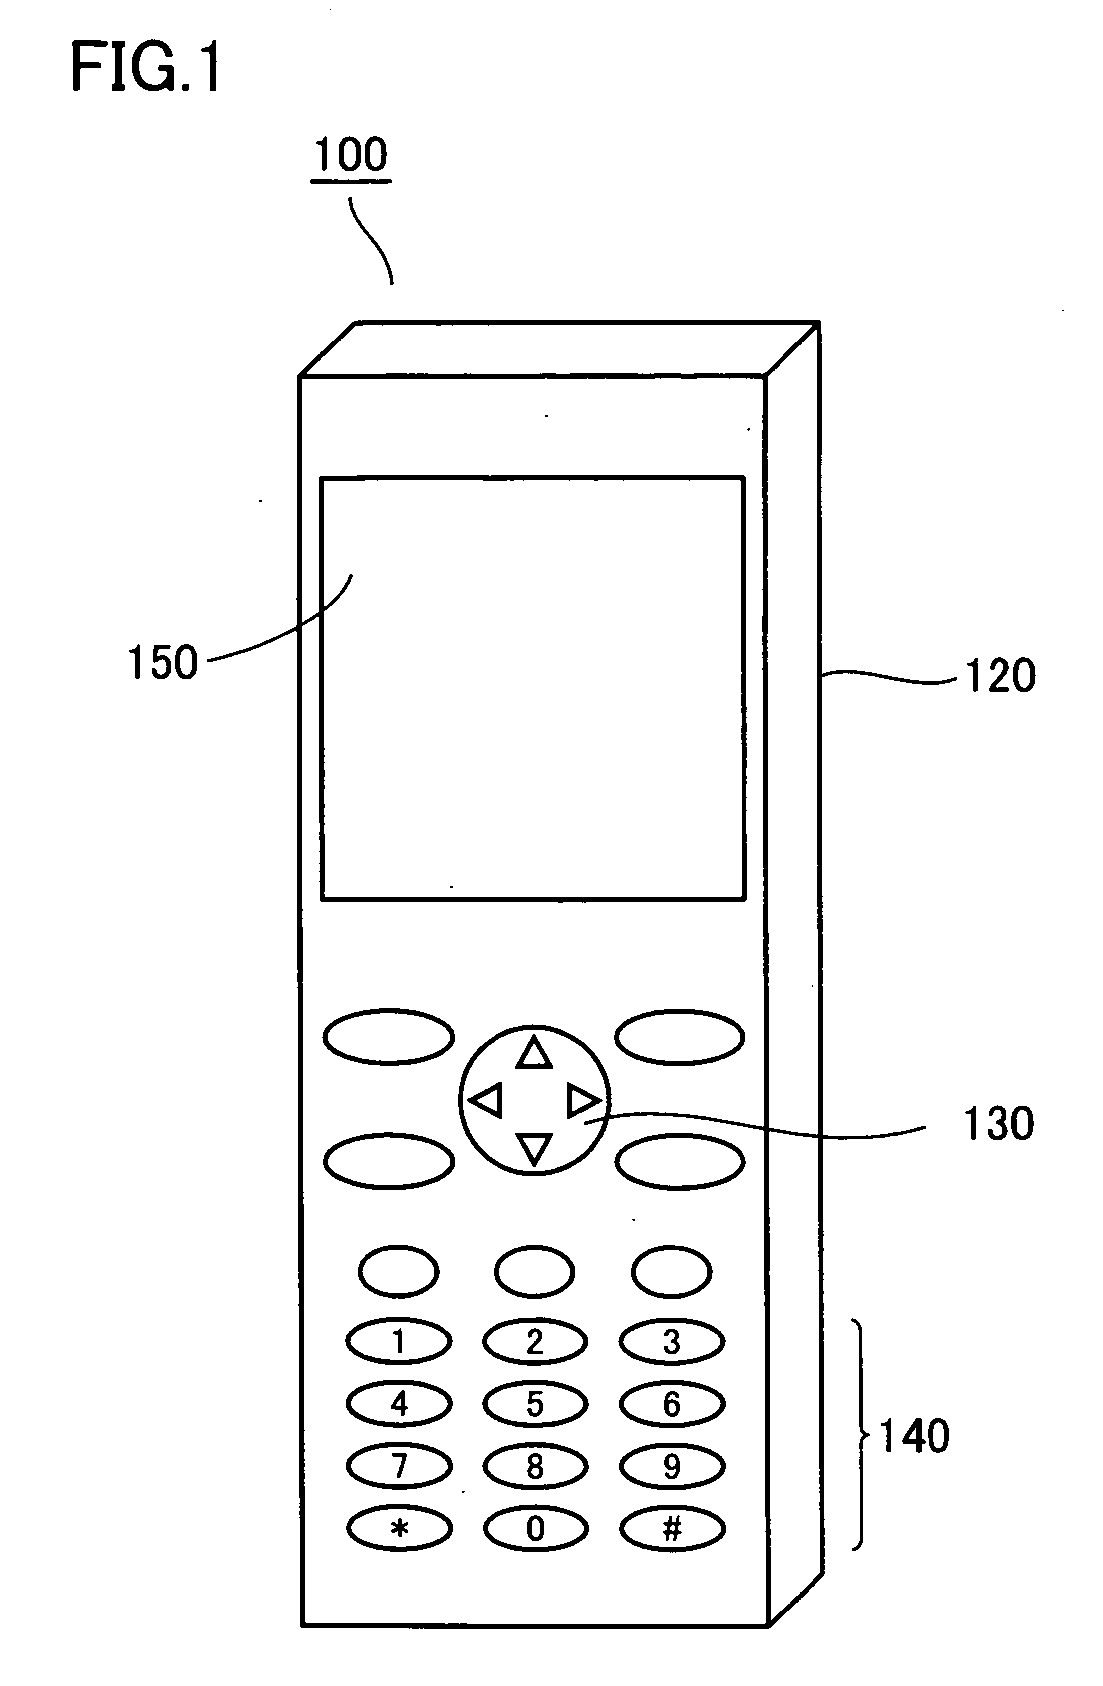 Portable information apparatus, character display method in portable information apparatus, and program product for implementing the method